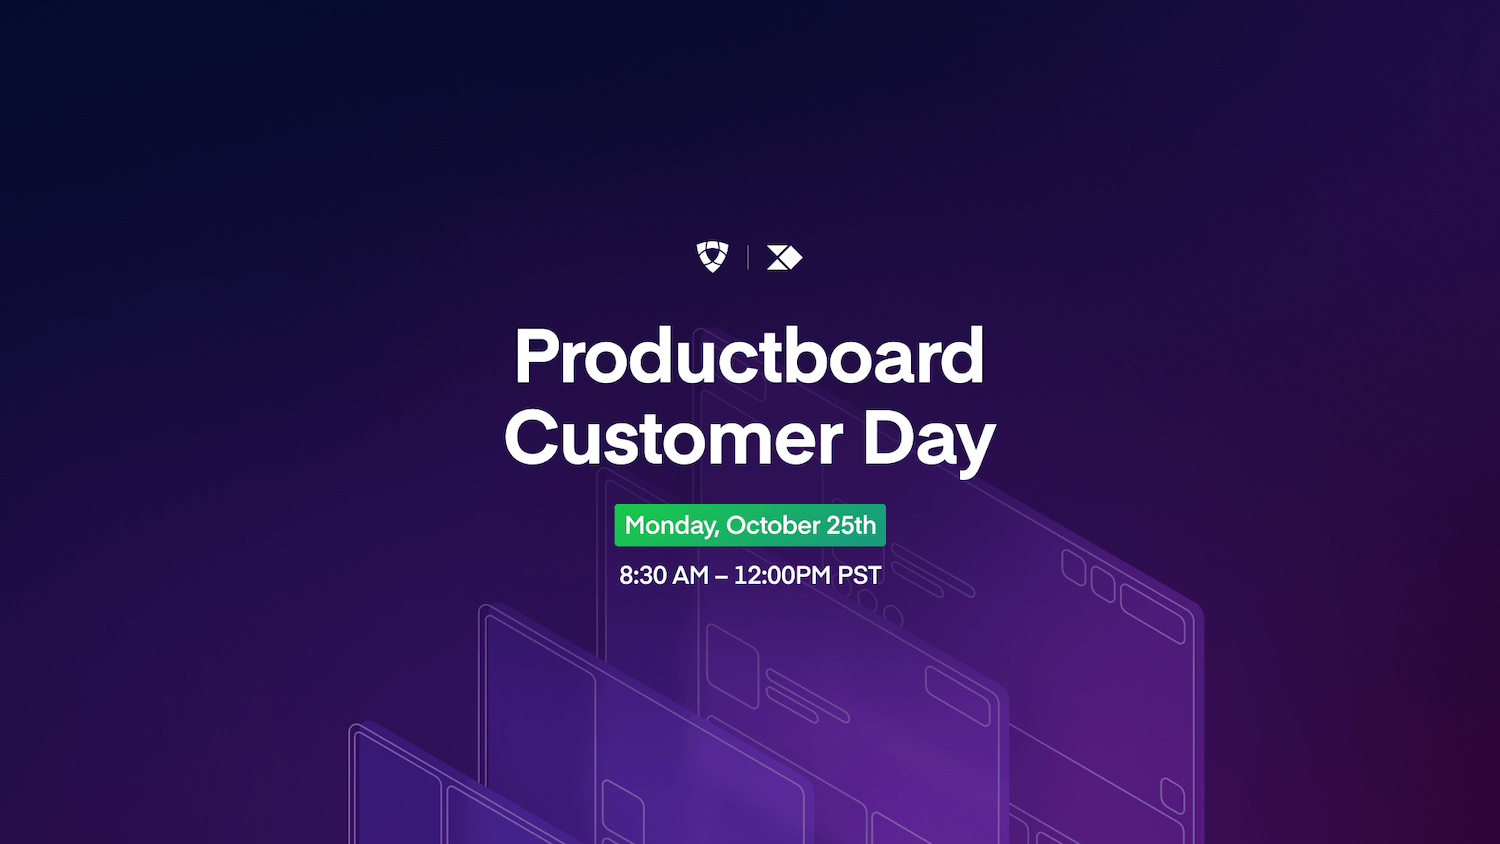 10/25 Event: Productboard Customer Day